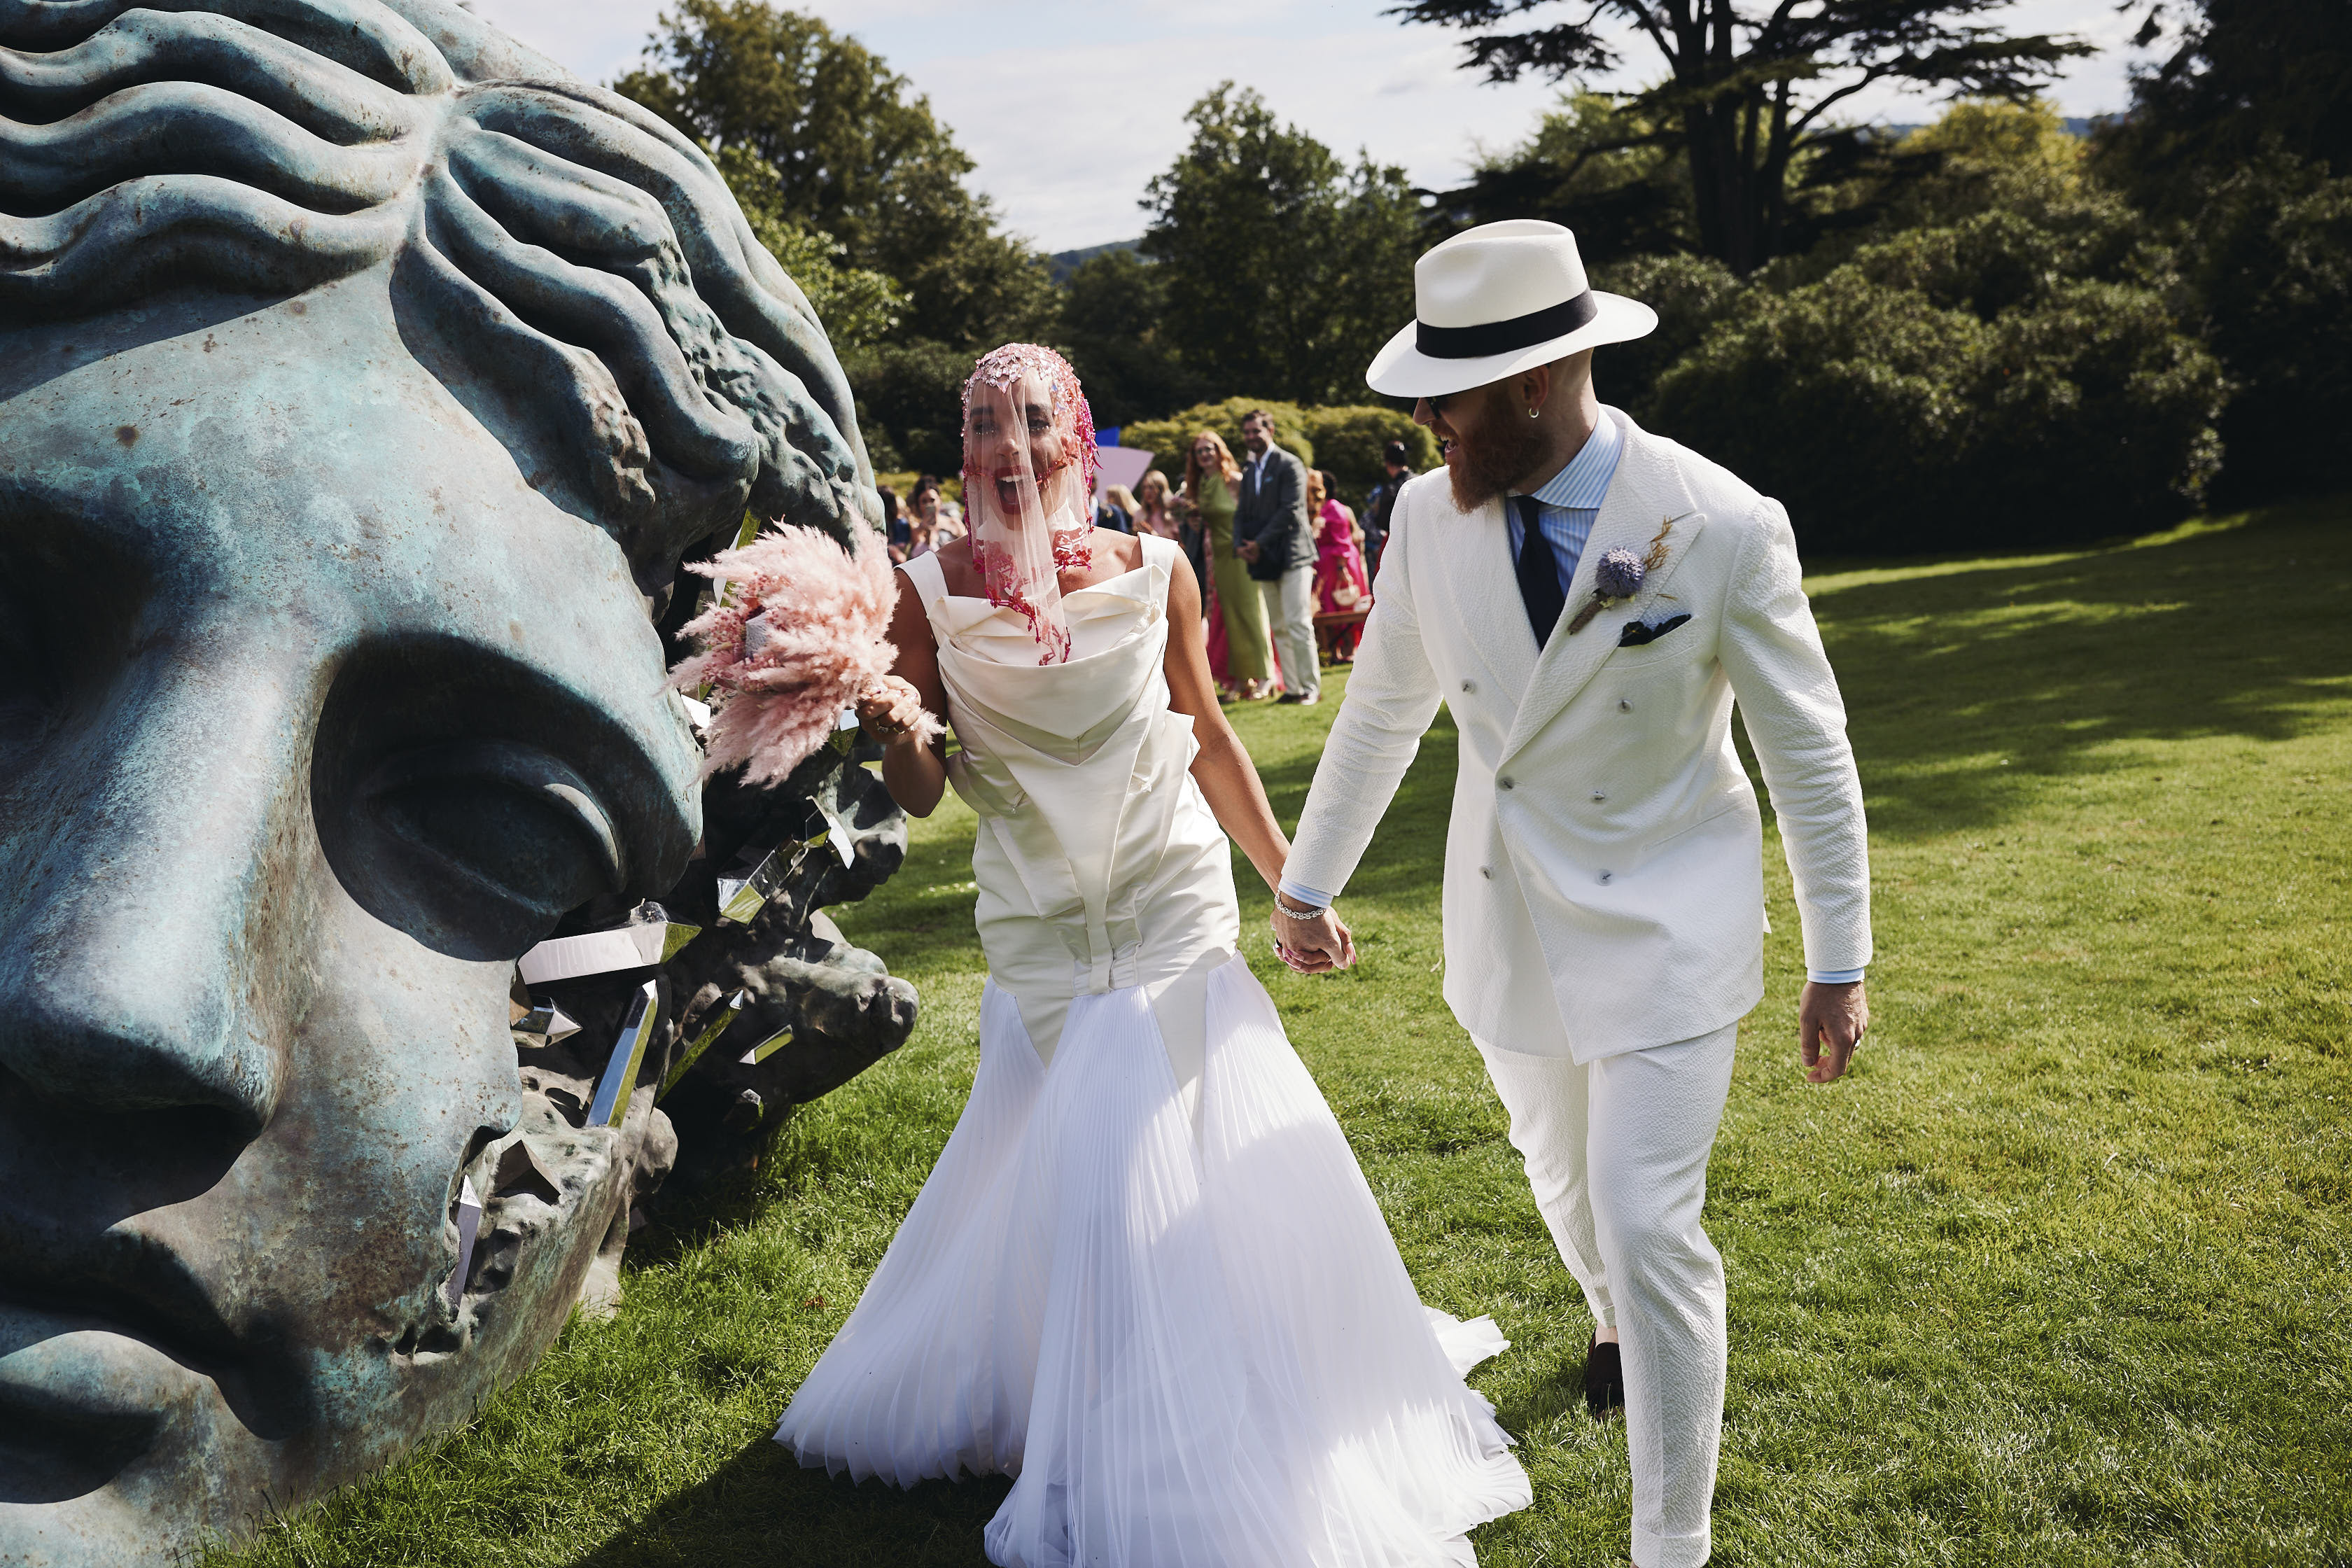 A bride and groom, wearing a white structured wedding dress and white suit, holding hands while walking past a giant bronze head sculpture.